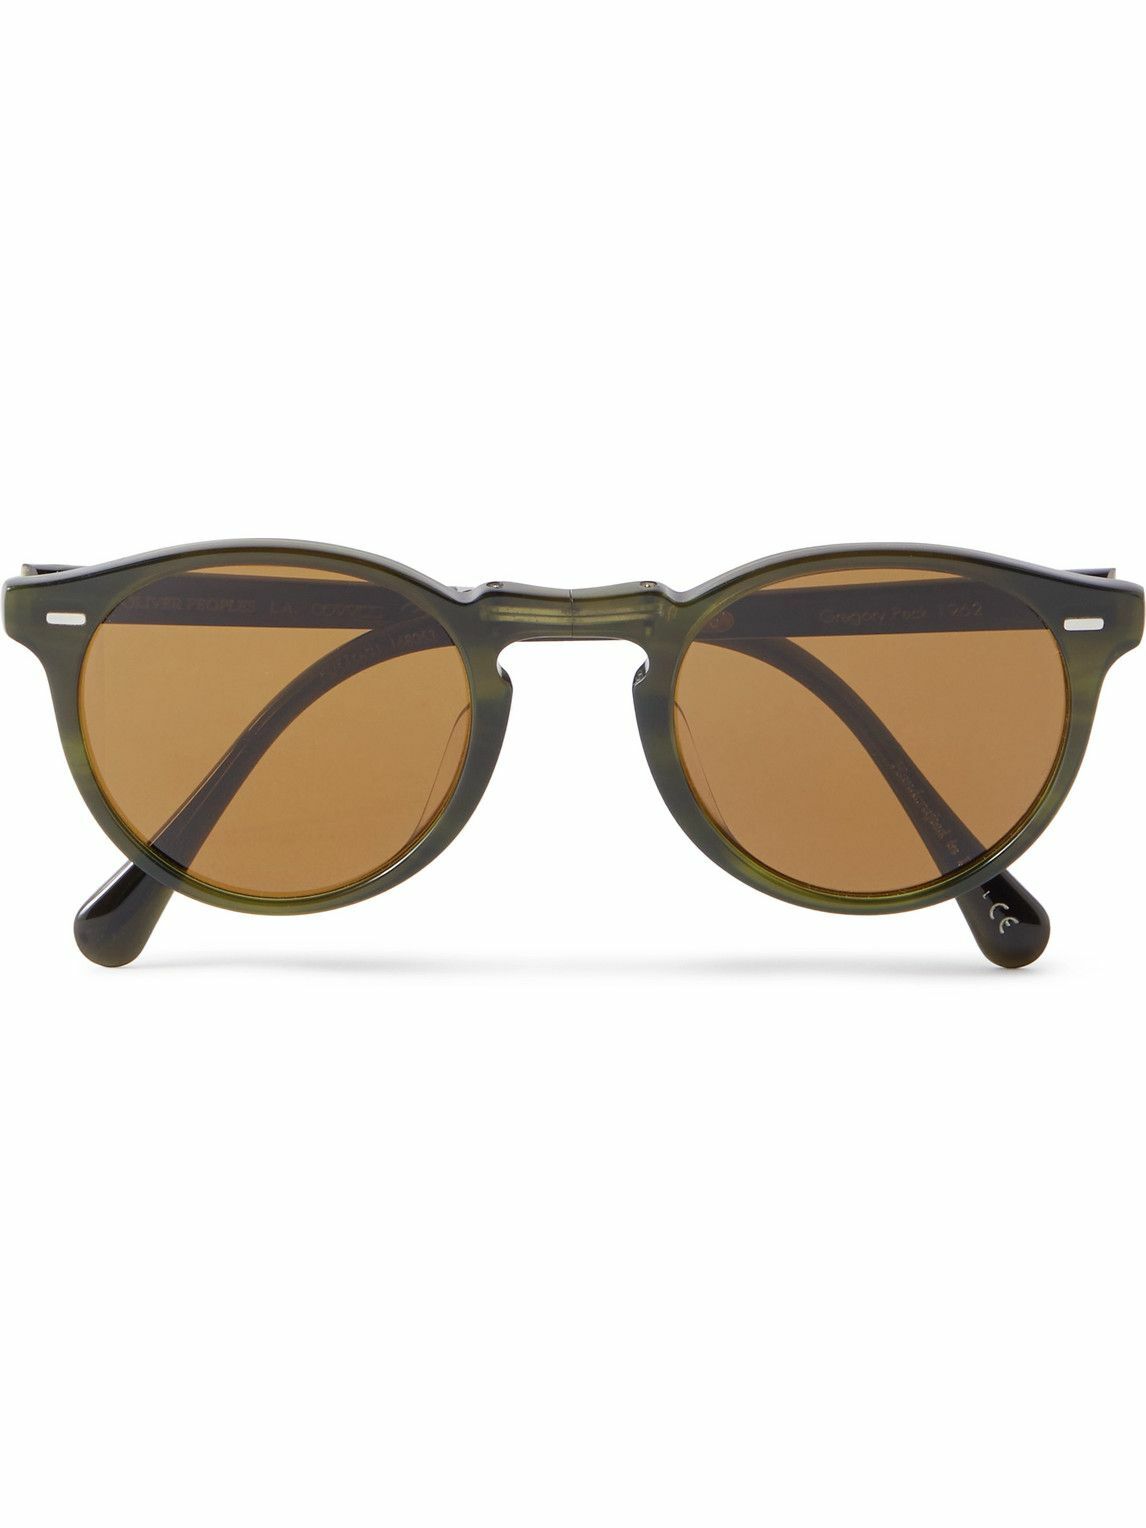 Oliver Peoples - Gregory Peck 1962 Foldable Round-Frame Acetate ...